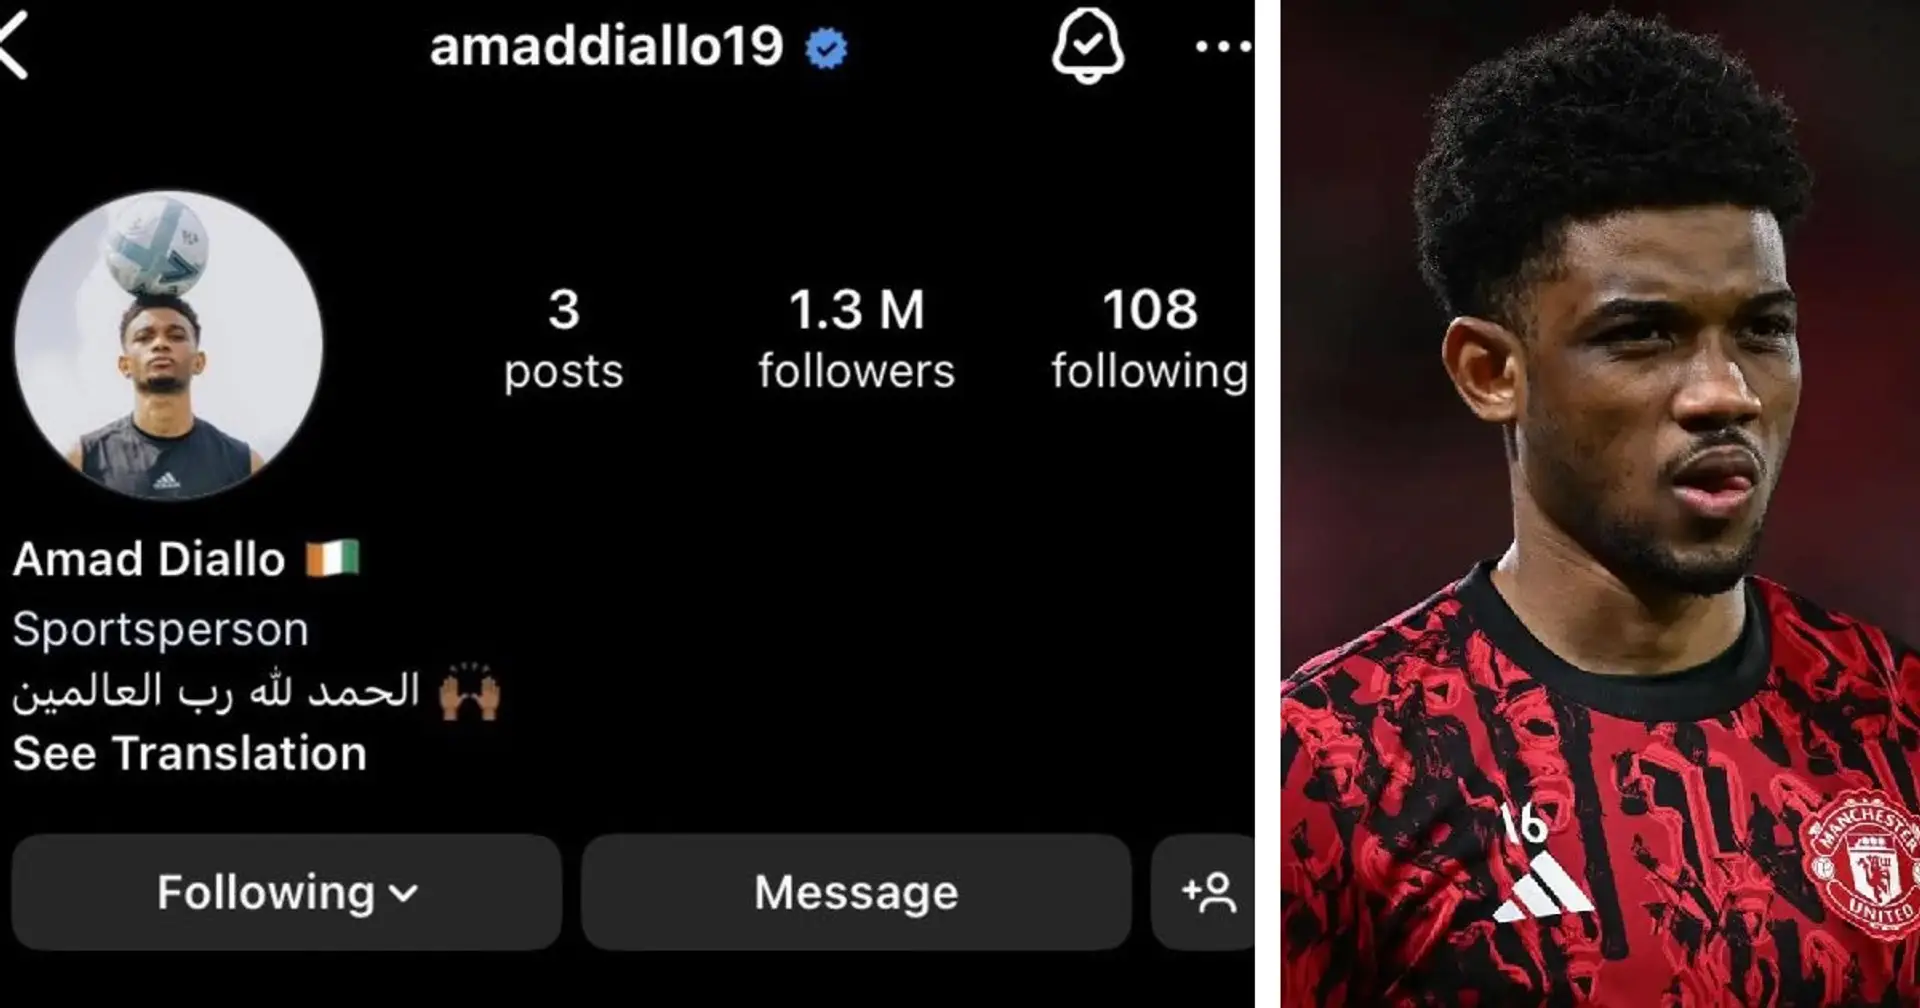 Amad deletes all Man United-related posts on social media